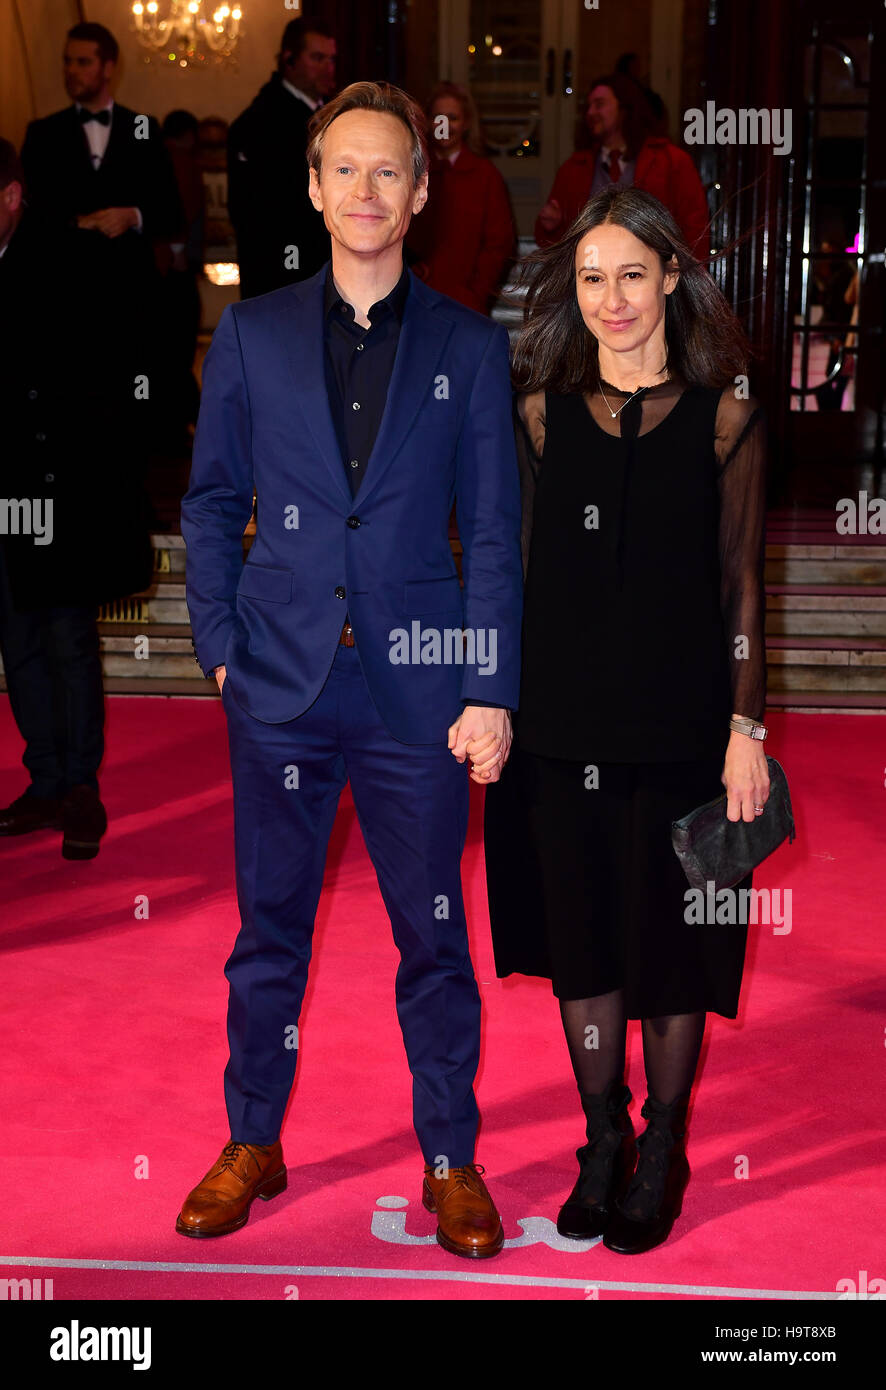 Steven Mackintosh and his wife Lisa Mackintosh attending the ITV Gala at the London Palladium. PRESS ASSOCIATION Photo. Picture date: Thursday November 24, 2016. See PA story SHOWBIZ Gala. Photo credit should read: Ian West/PA Wire Stock Photo